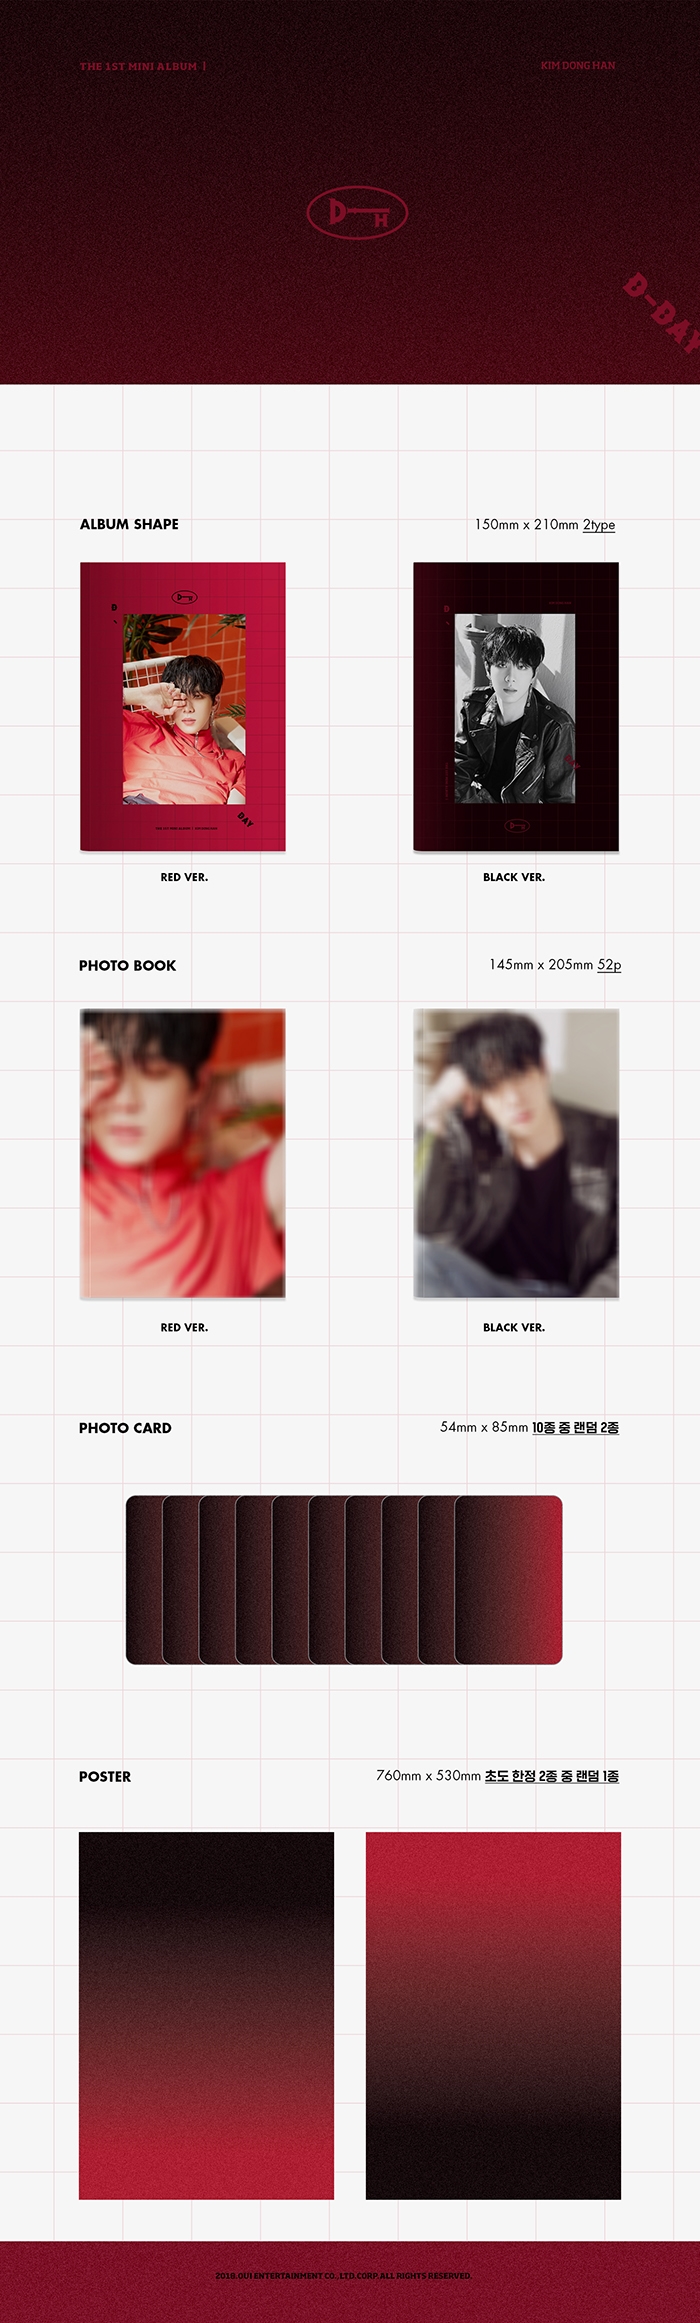 RED--gimdonghan-D-DAY-1ST-miniaelbeom-RED-VER-L200001593-2209999991360